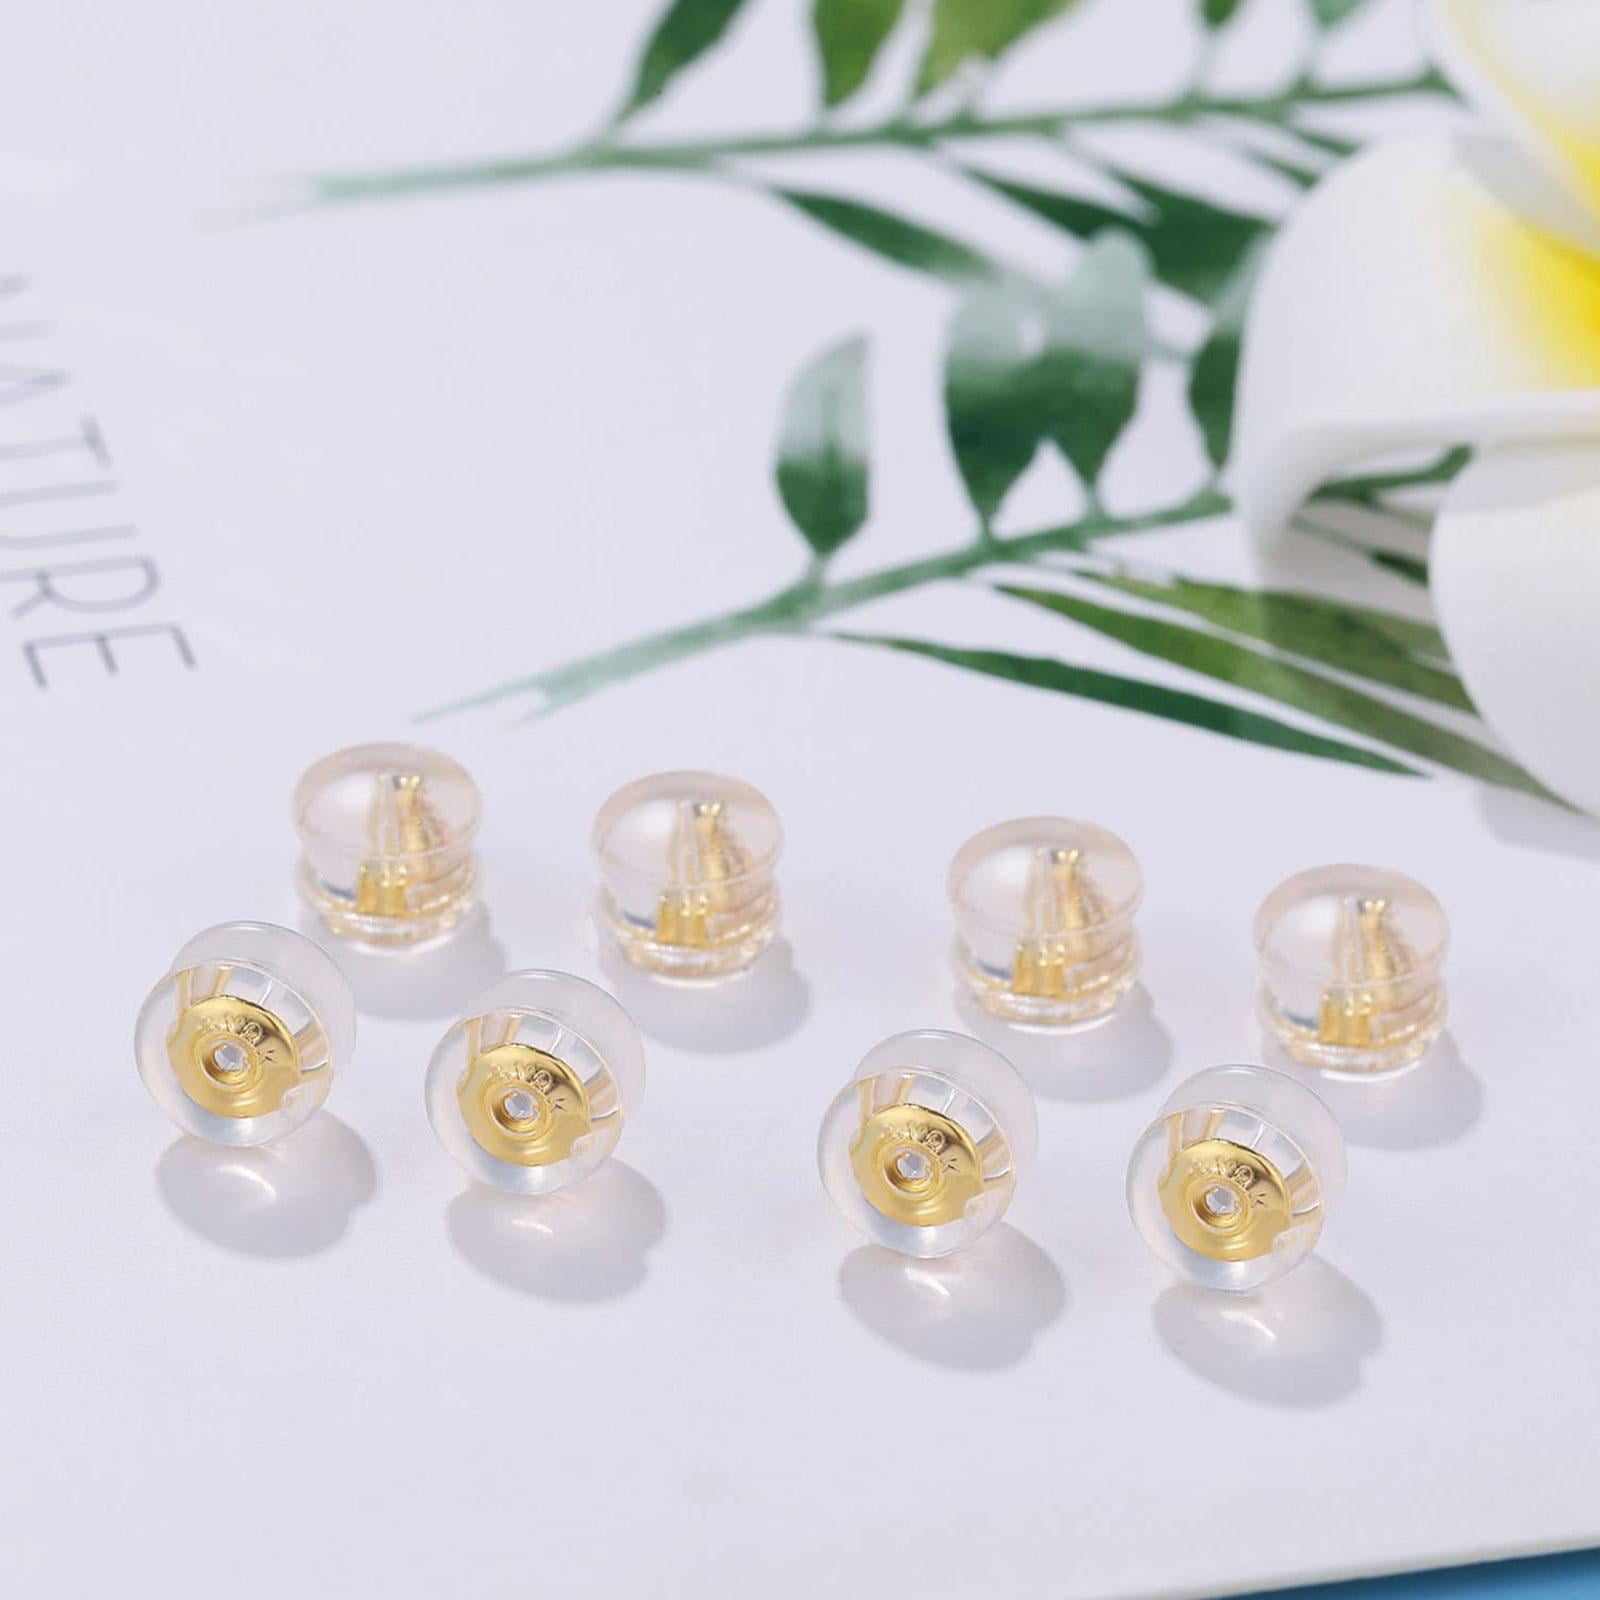 Kearace 14pcs Silicone Earring Backs Replacements for Studs/Droopy Ears,Locking Secure Earring Backs for Studs,No-Irritate Hypoallergenice for